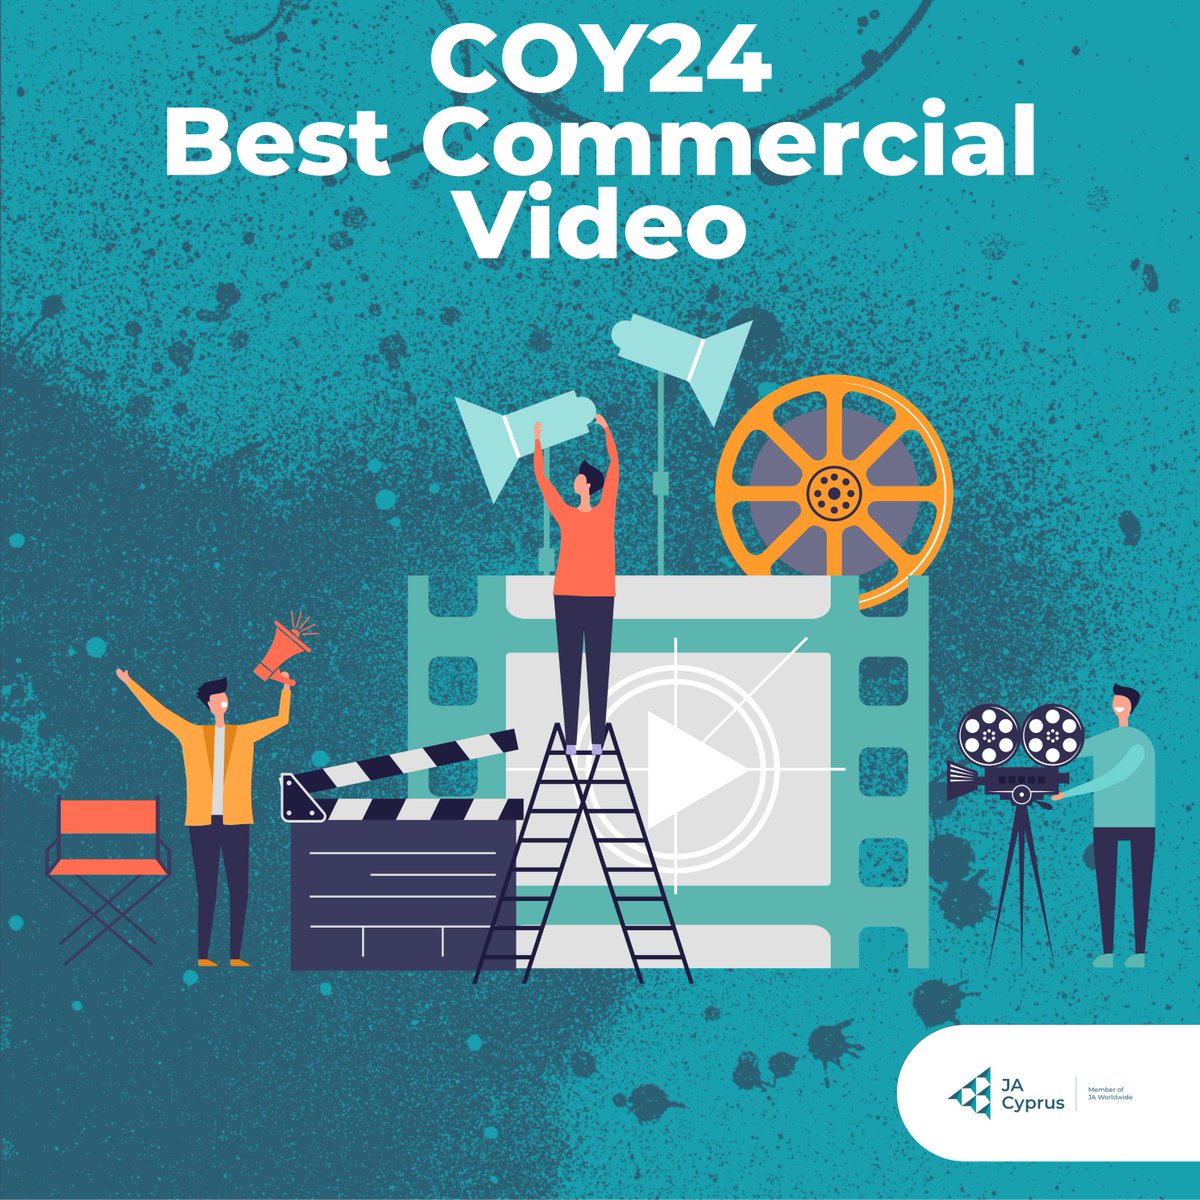 The Company of the Year 2024 Best Commercial Video 🎬 Contest is now LIVE! 🎉 Visit the JA Cyprus YouTube channel at the link below 👇 , view the teams’ videos, Like 👍 and share to support them! The contest will run until next Monday 18/3 at noon ⏳ youtube.com/playlist?list=…